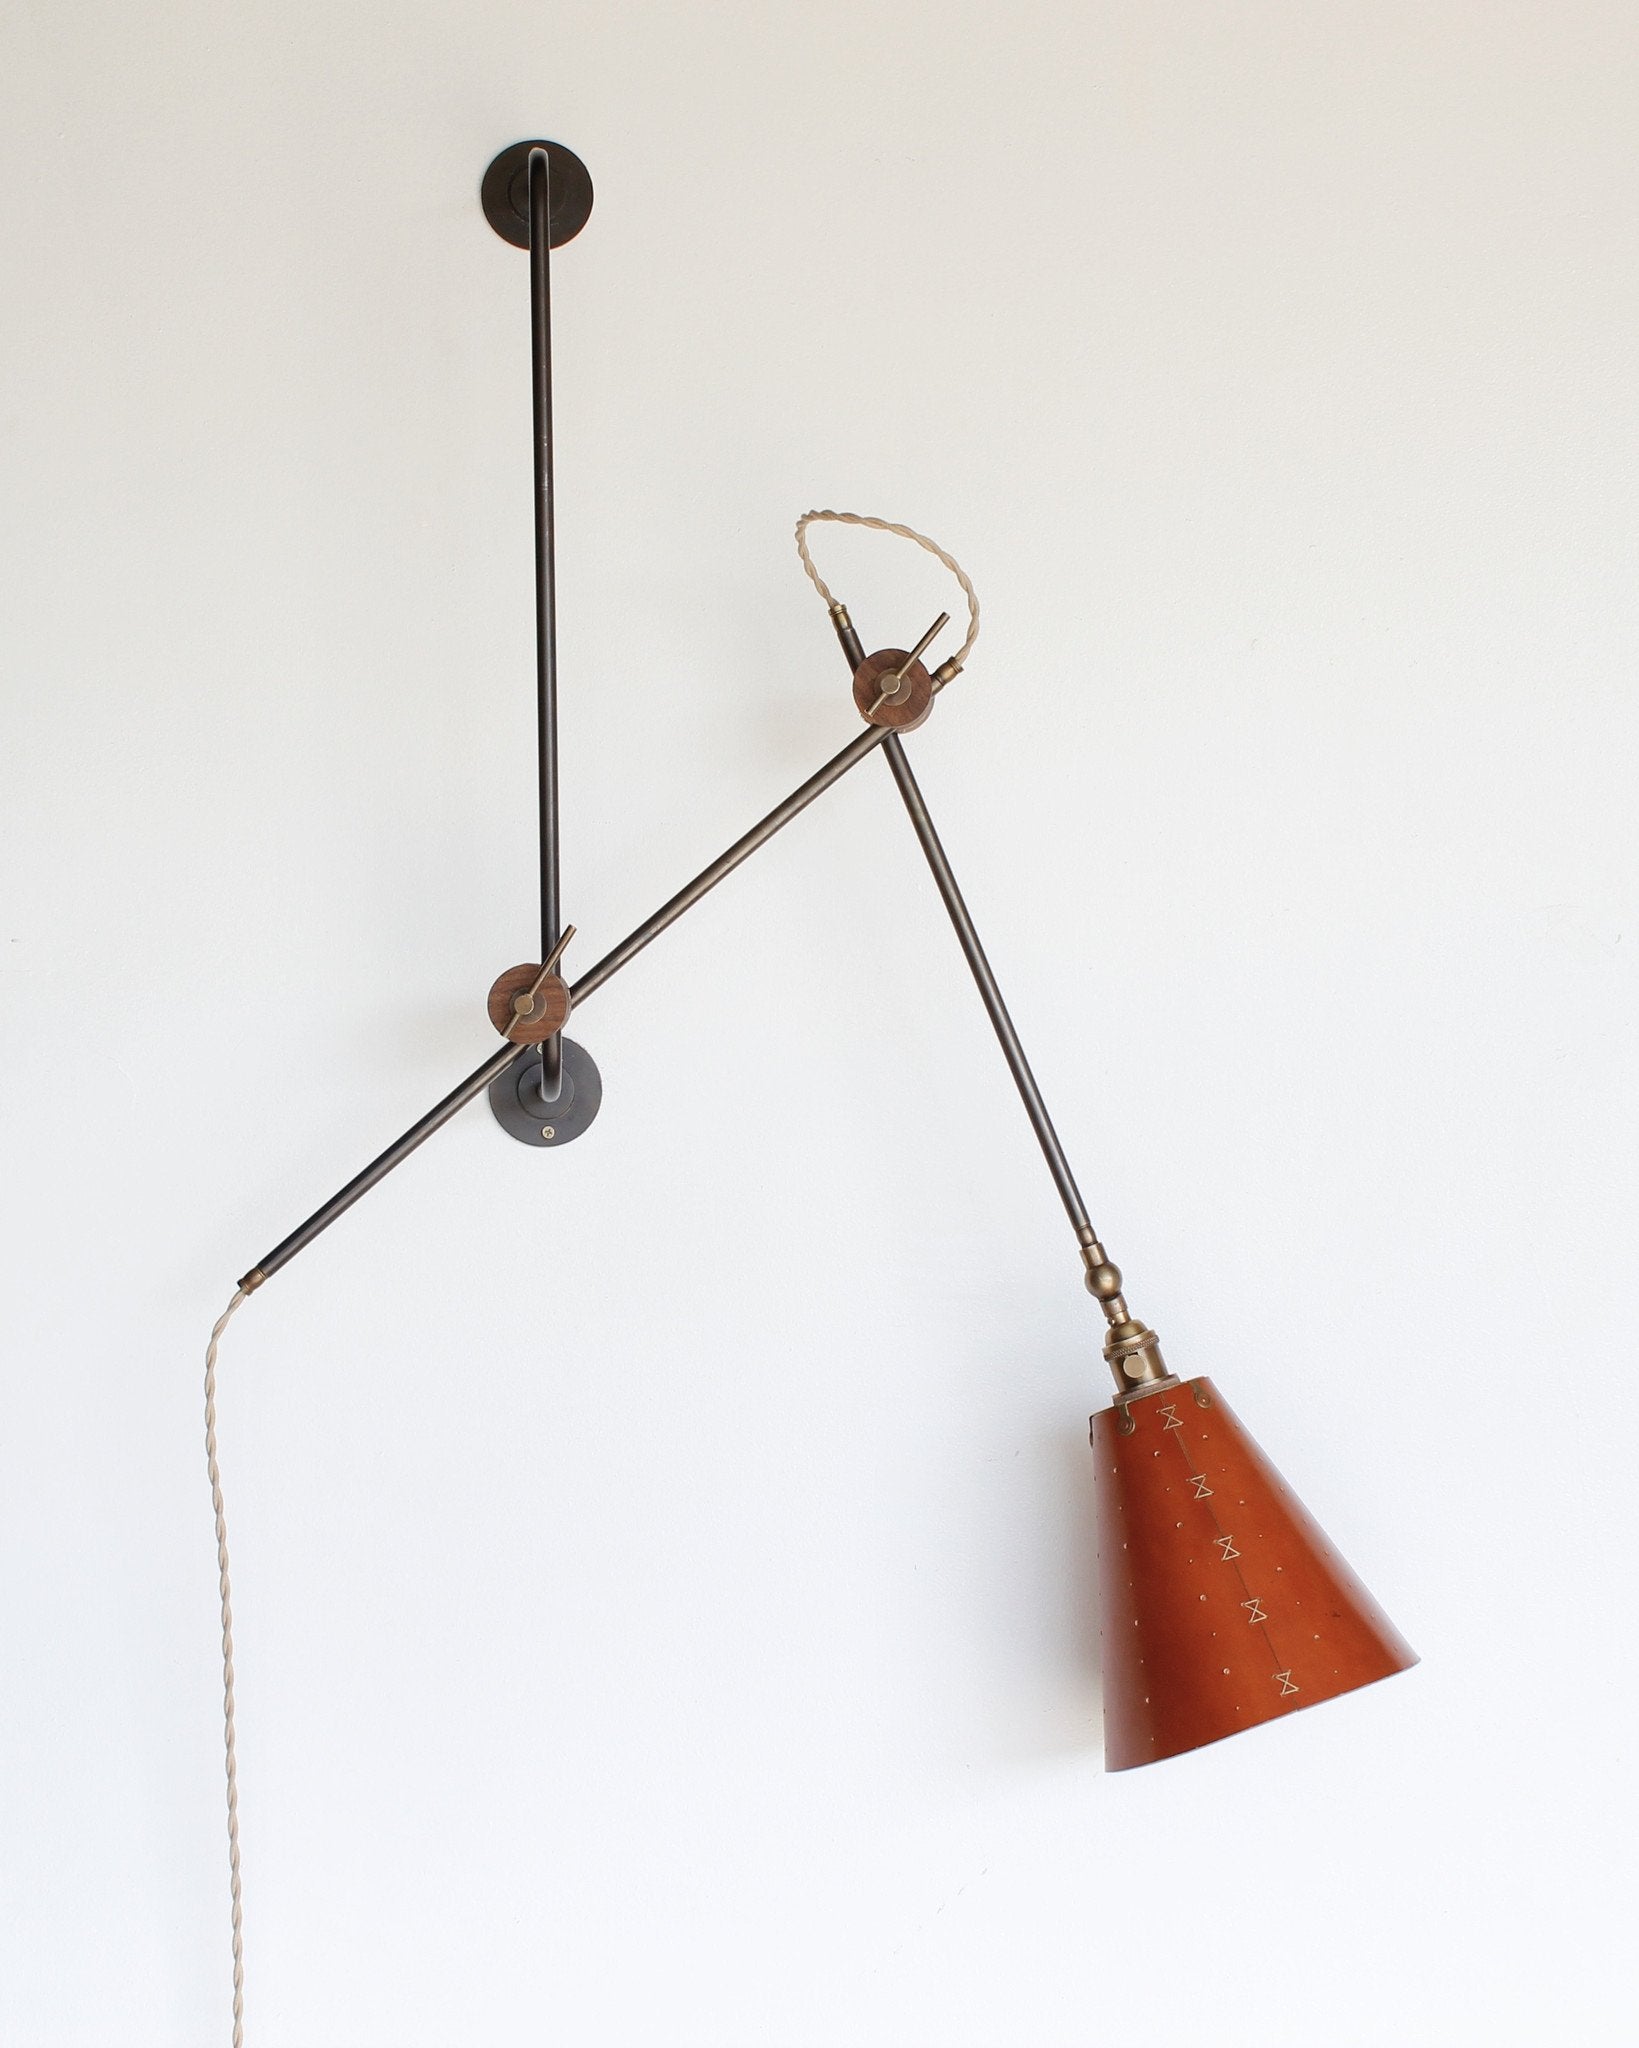 Large articulating black plug in wall sconce with tan handstitched cone leather shade